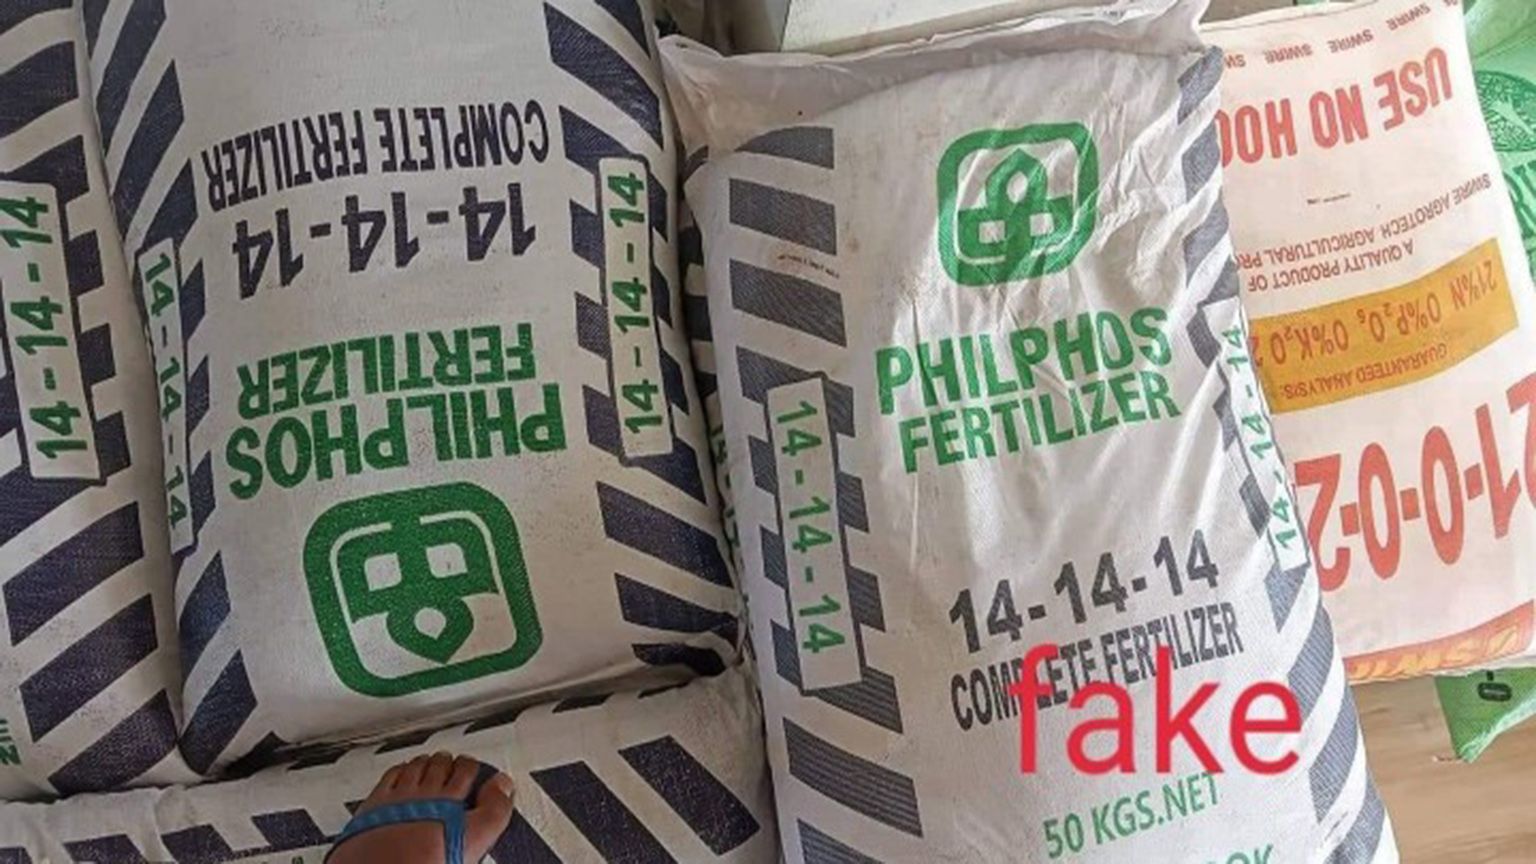 Fake fertilizers being sold to farmers